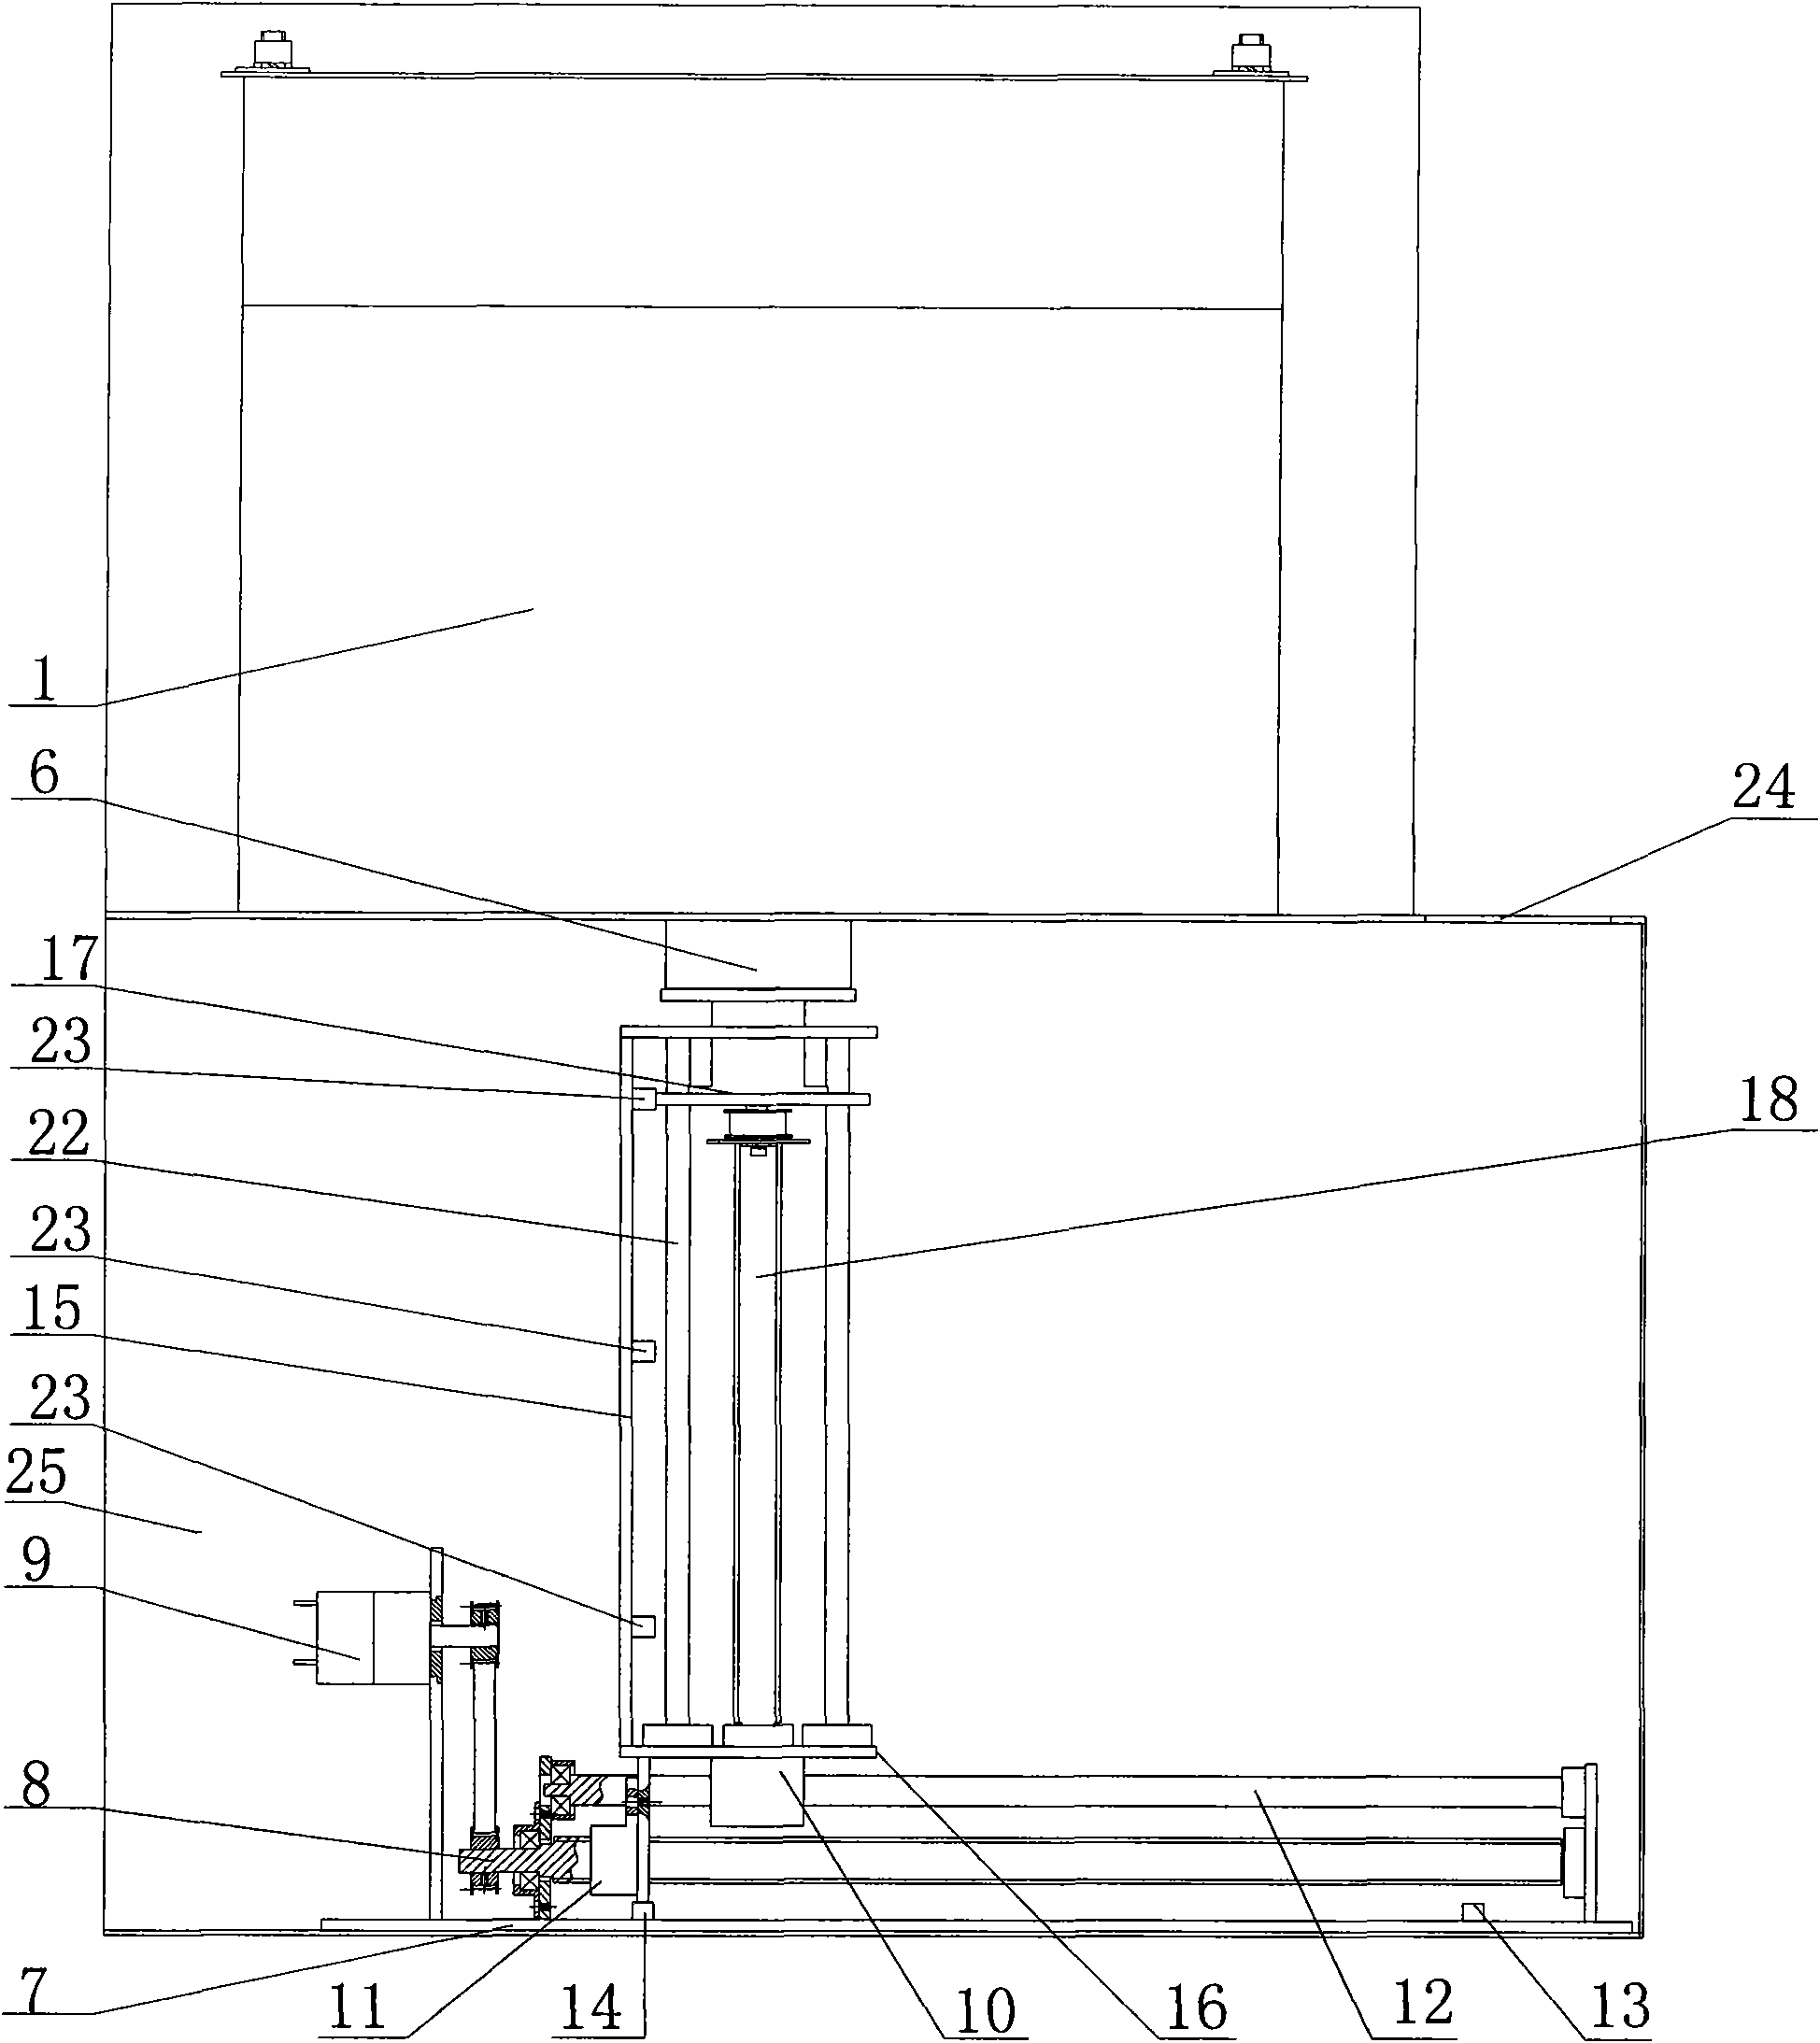 Ash fusibility testing instrument capable of automatically conveying and taking samples